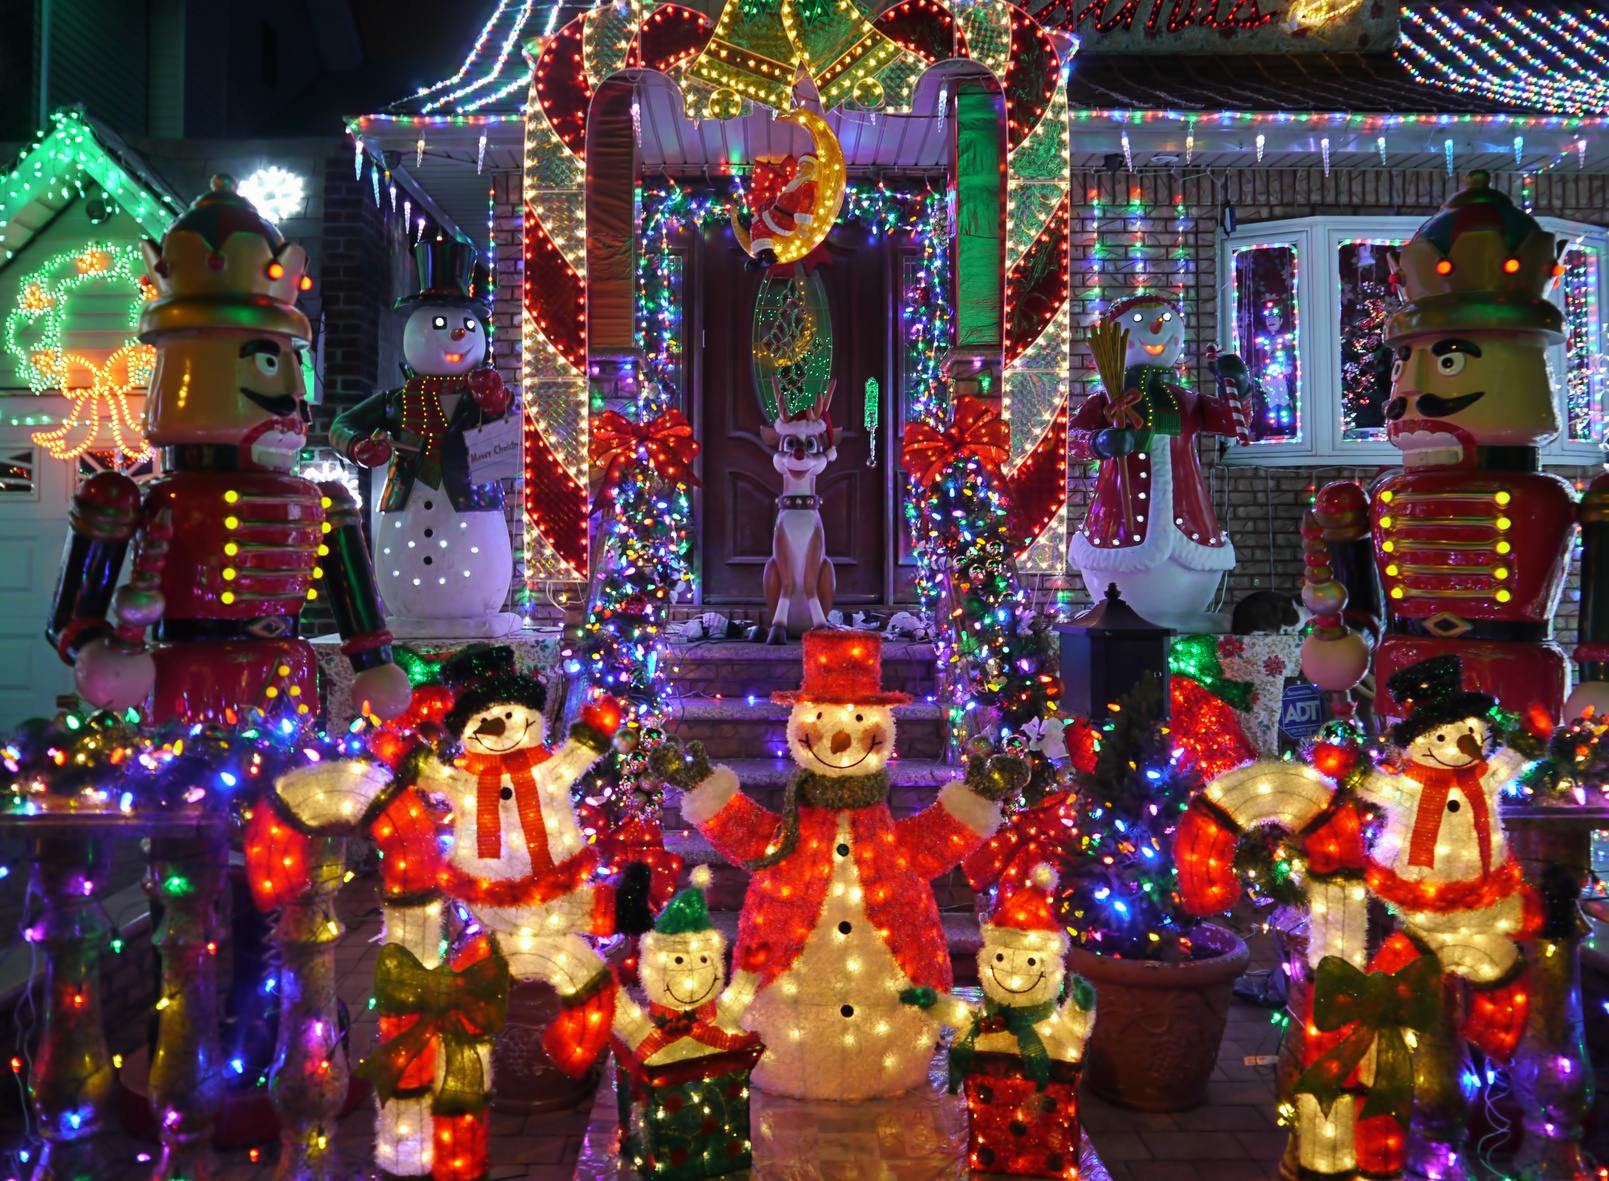 Brighten The Festive Season with Local Holiday Lights! - Weaver